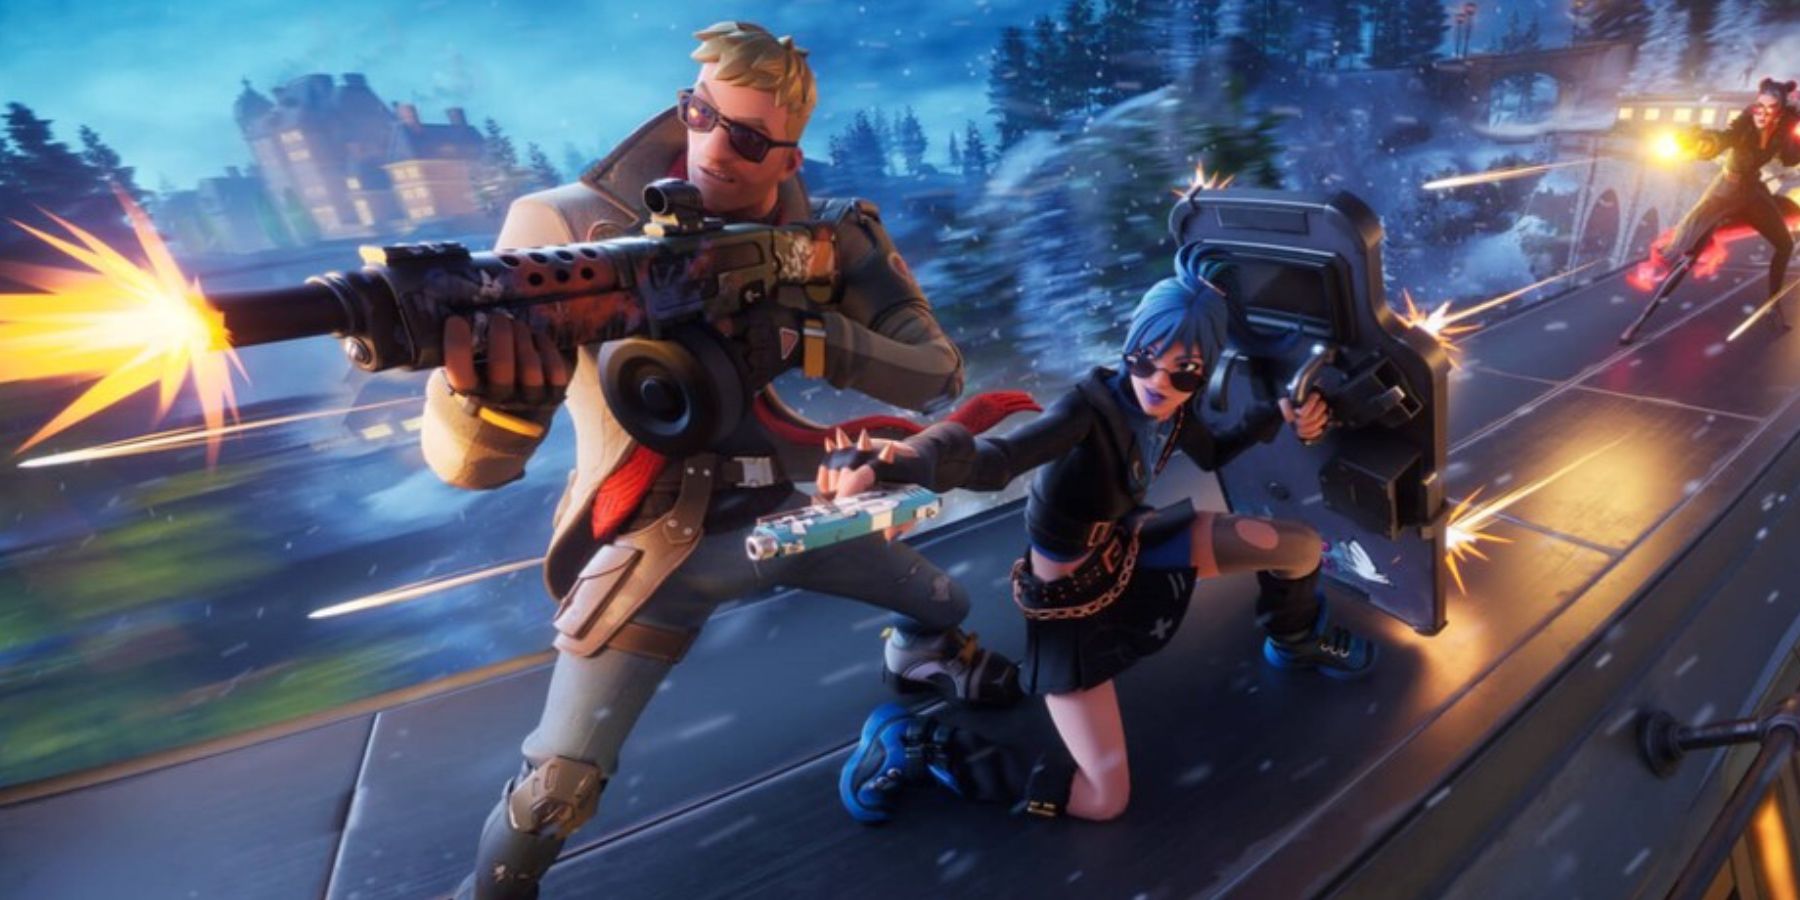 Fortnite Players Want Changes Made to the Train